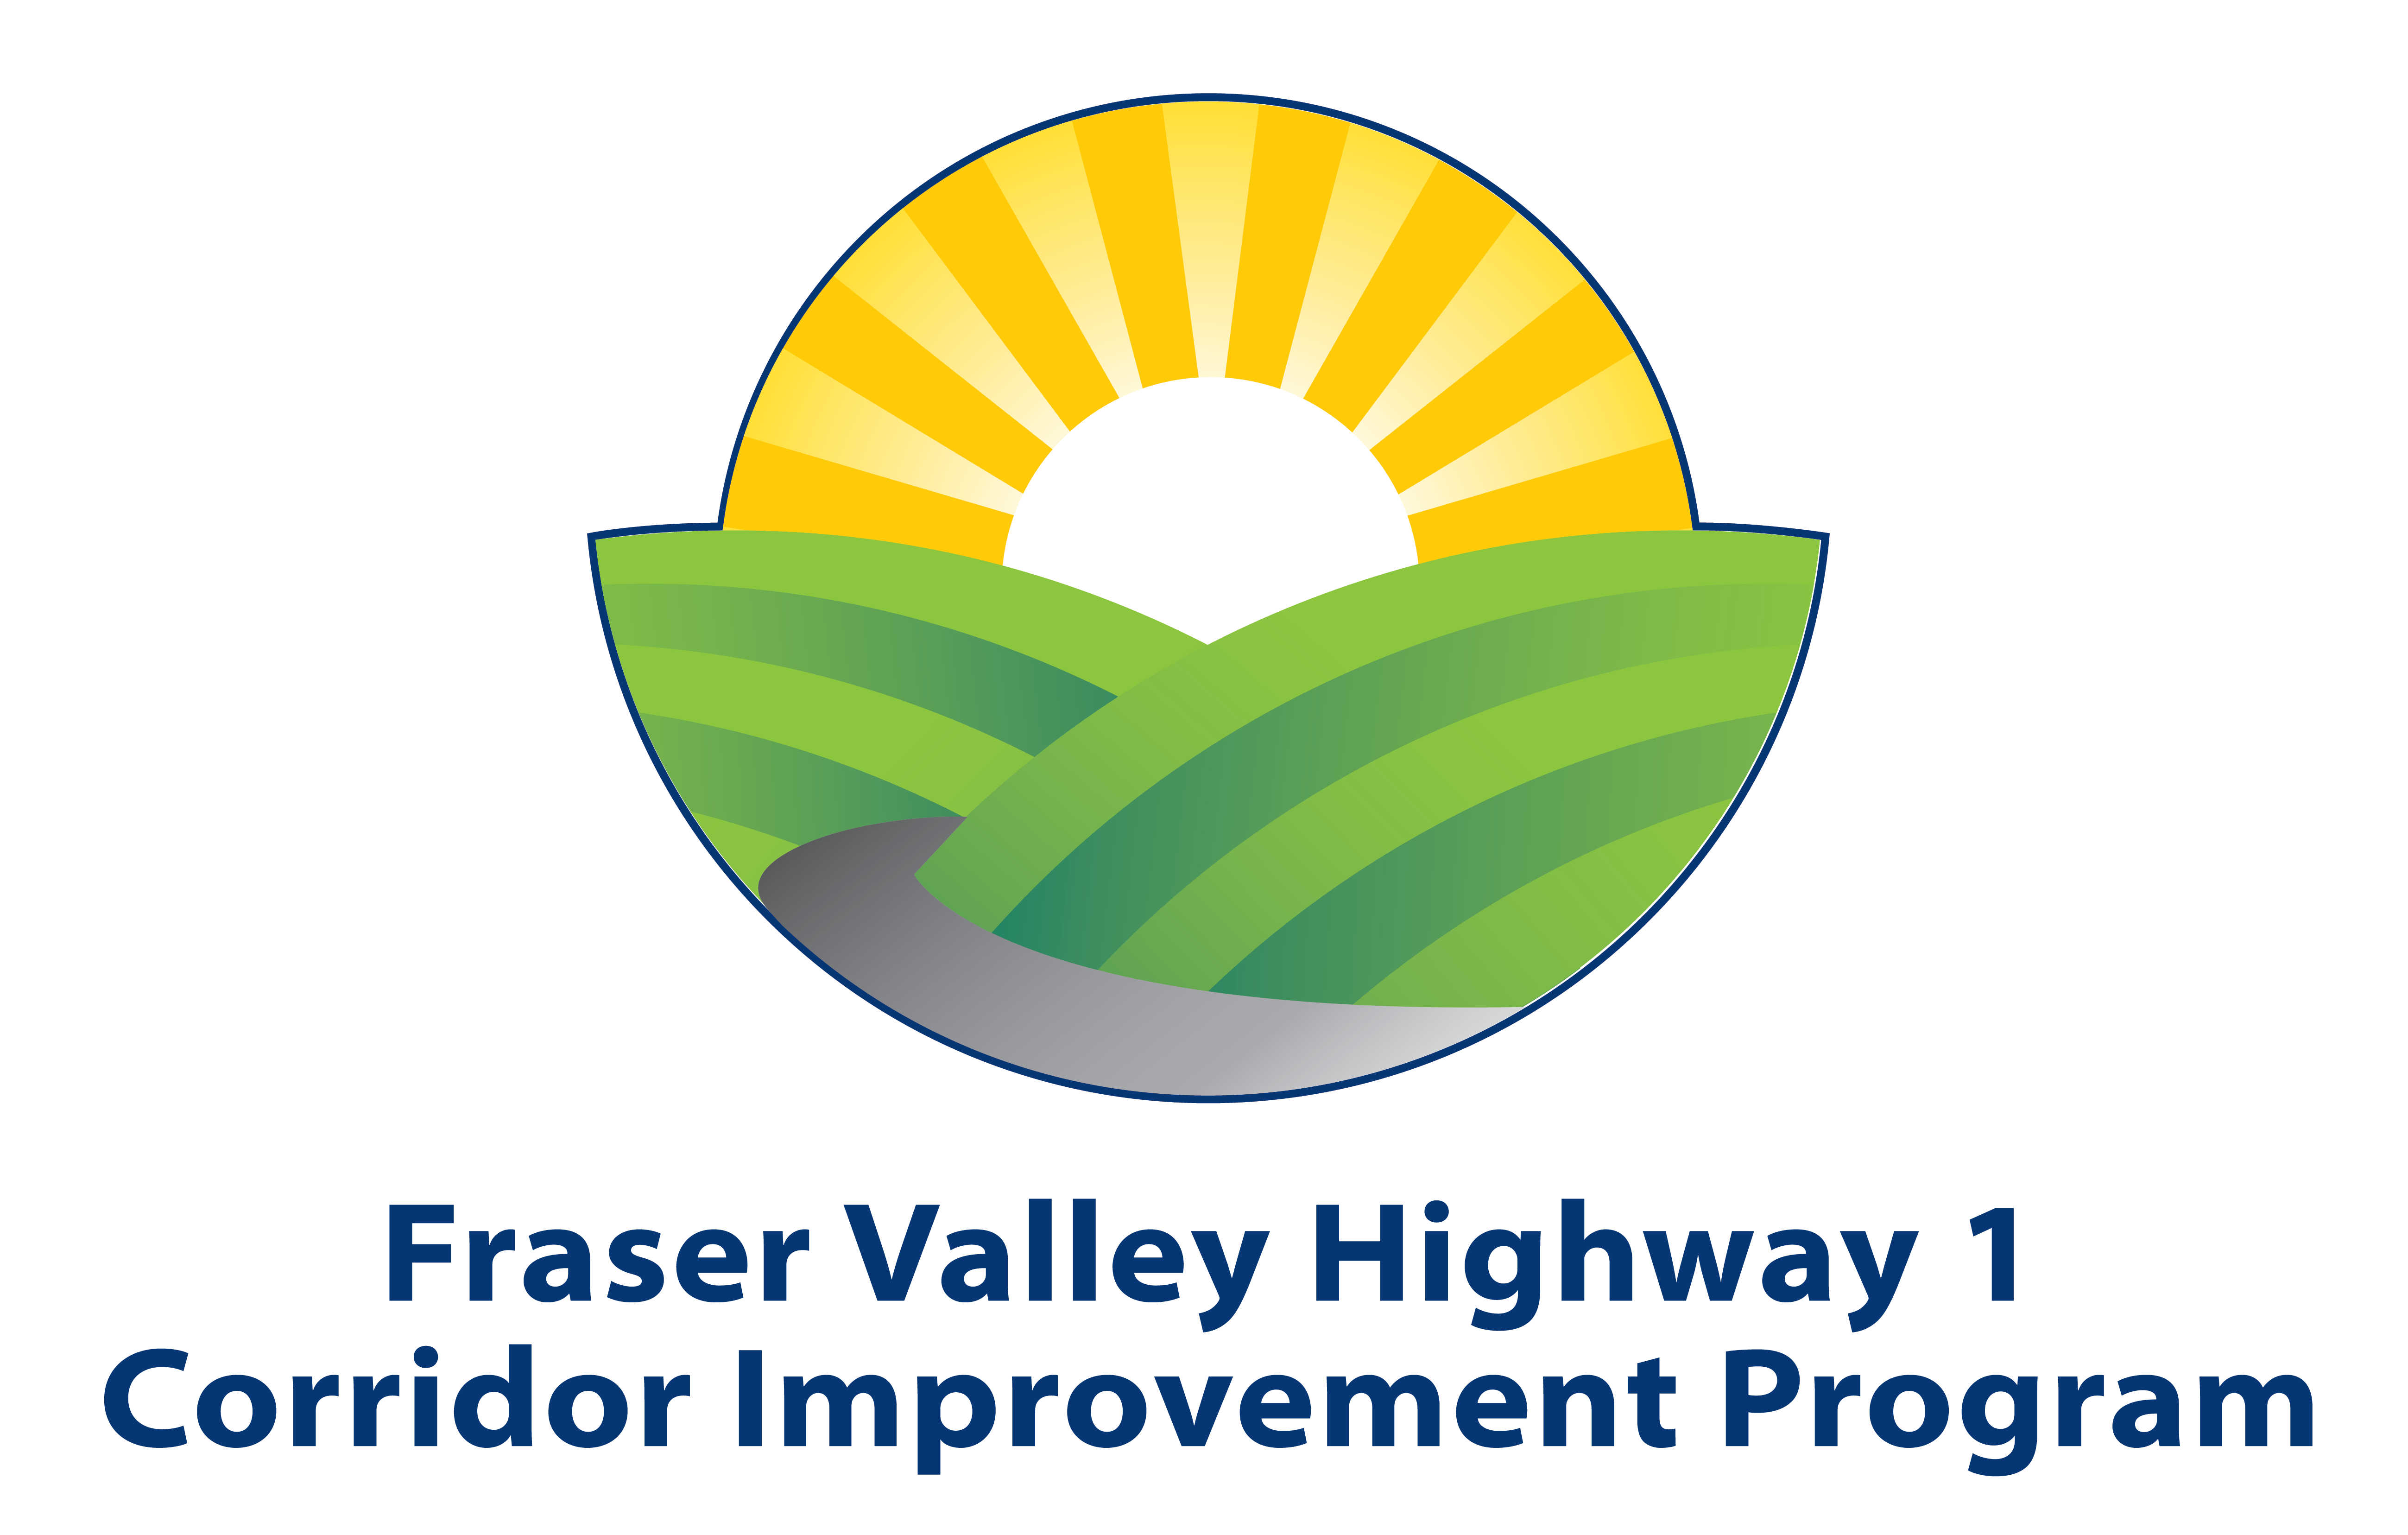 Fraser Valley Highway 1 Corridor Improvement Program Logo-showing BC Sun with green valley and road running through